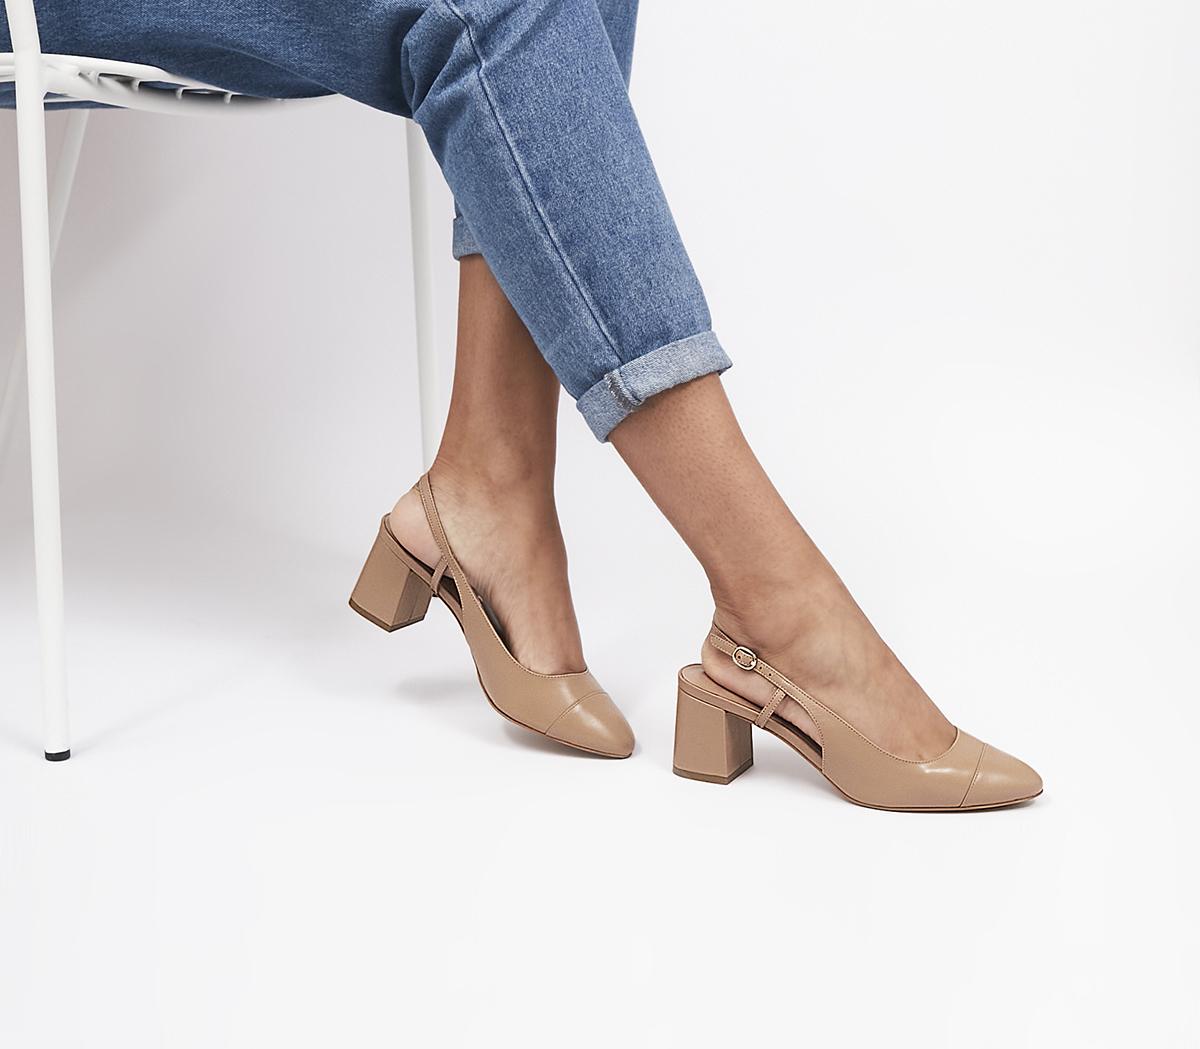 OFFICEMirage Slingback Block CourtsCamel Leather